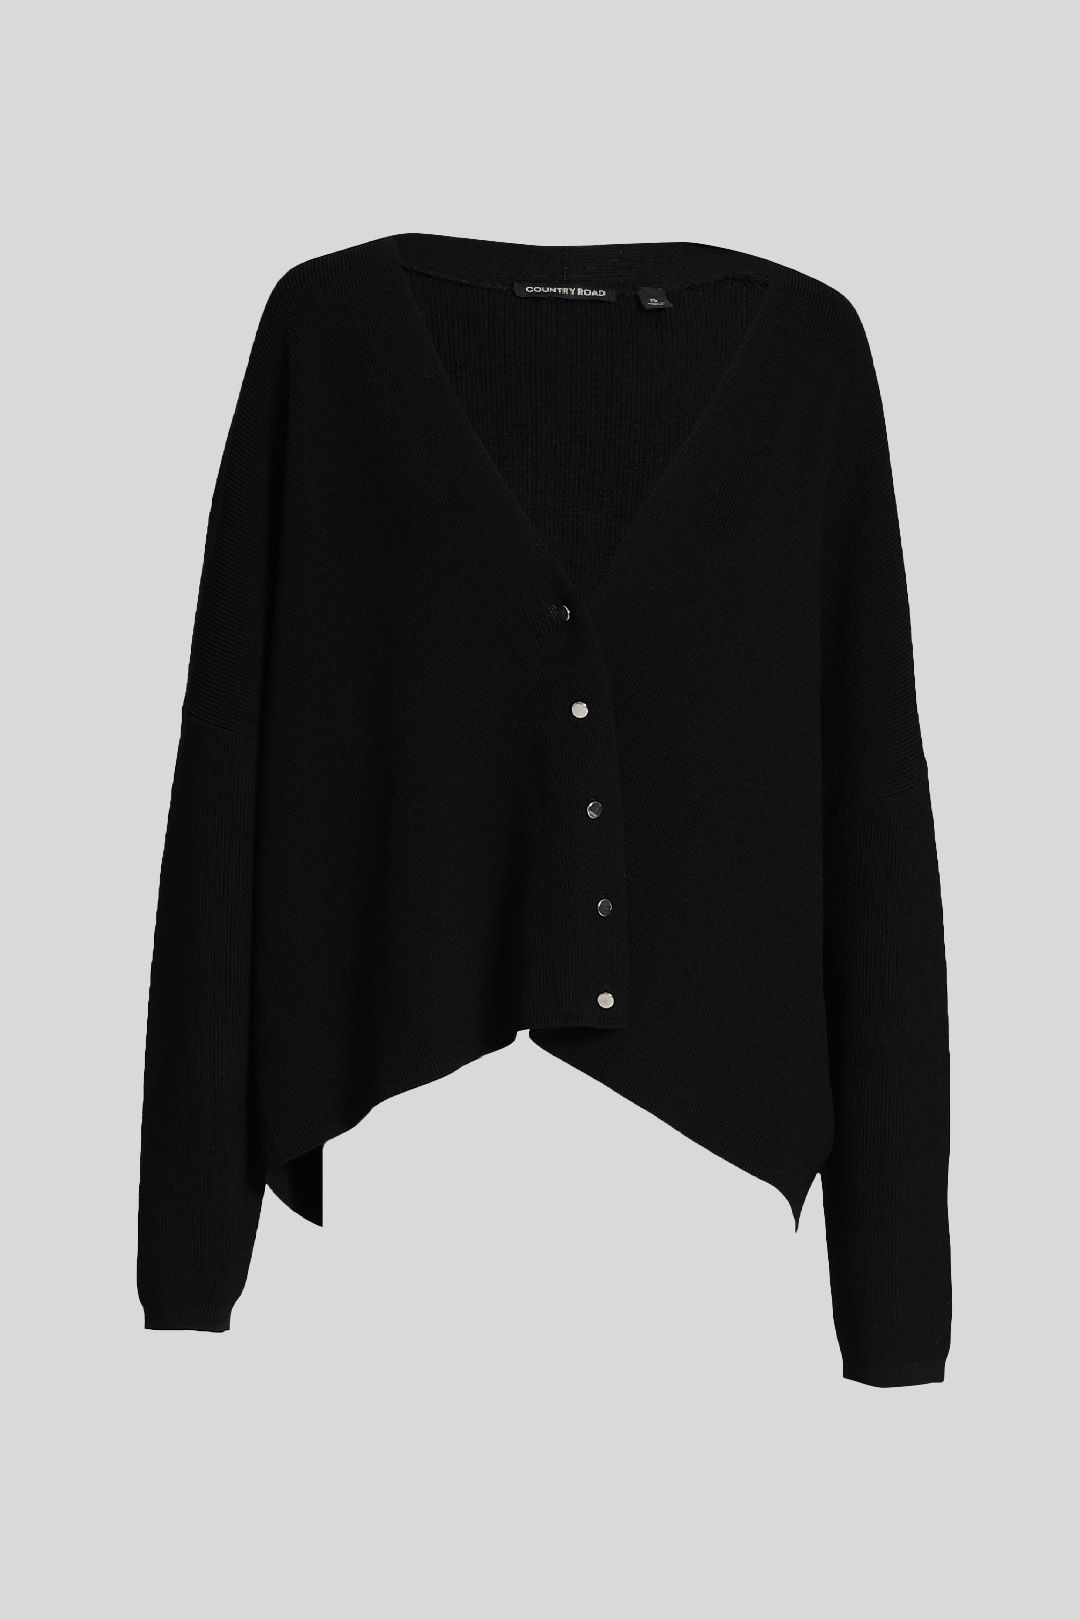 Country Road Black Box Style Cardigan